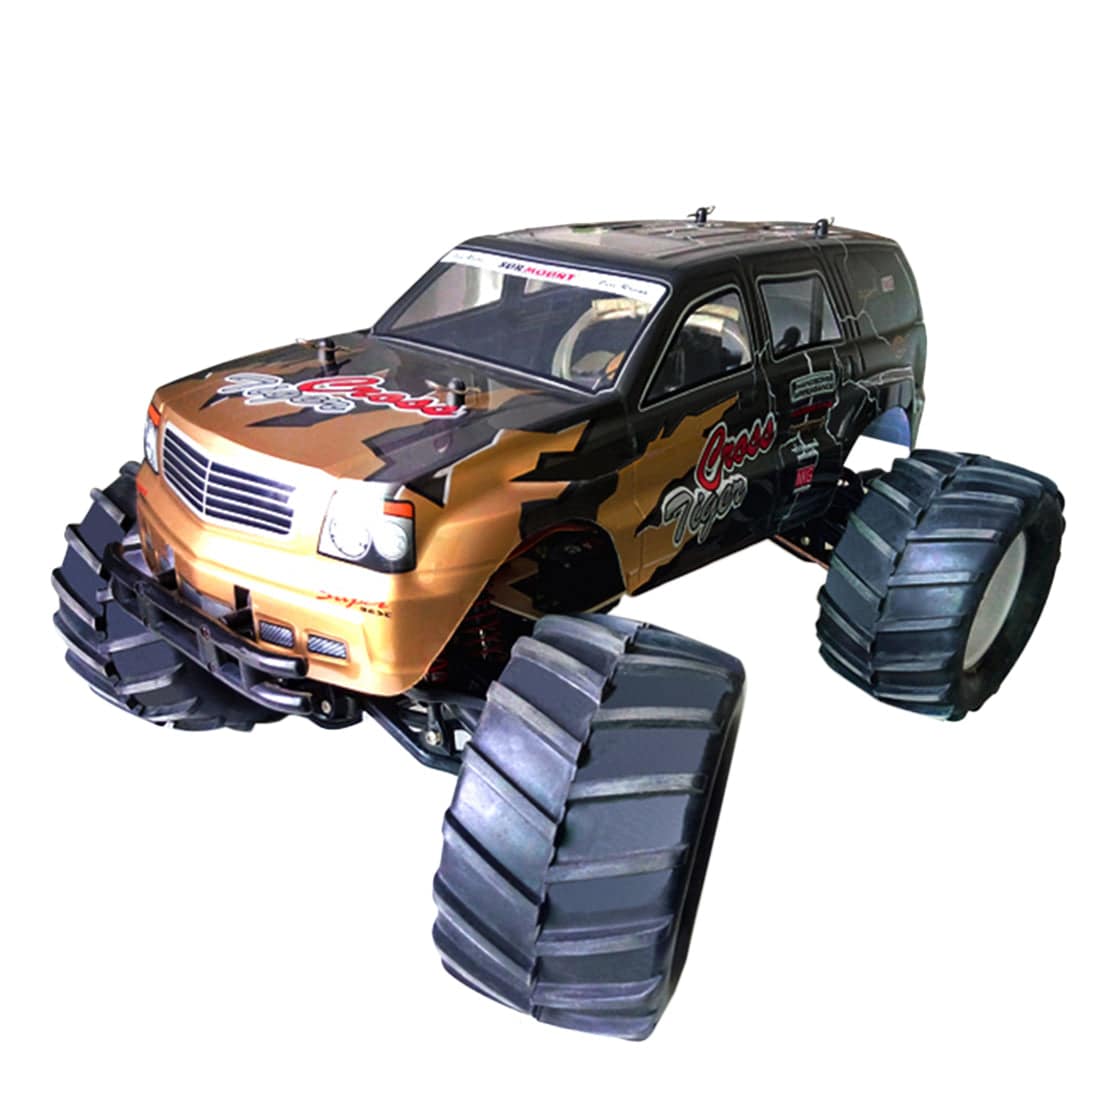 kloon Ligatie Vertellen 1/8 2.4G Gasoline RC Car Off-road Model 60KM/H with Two-stage Gearbox RTR -  Stirlingkit